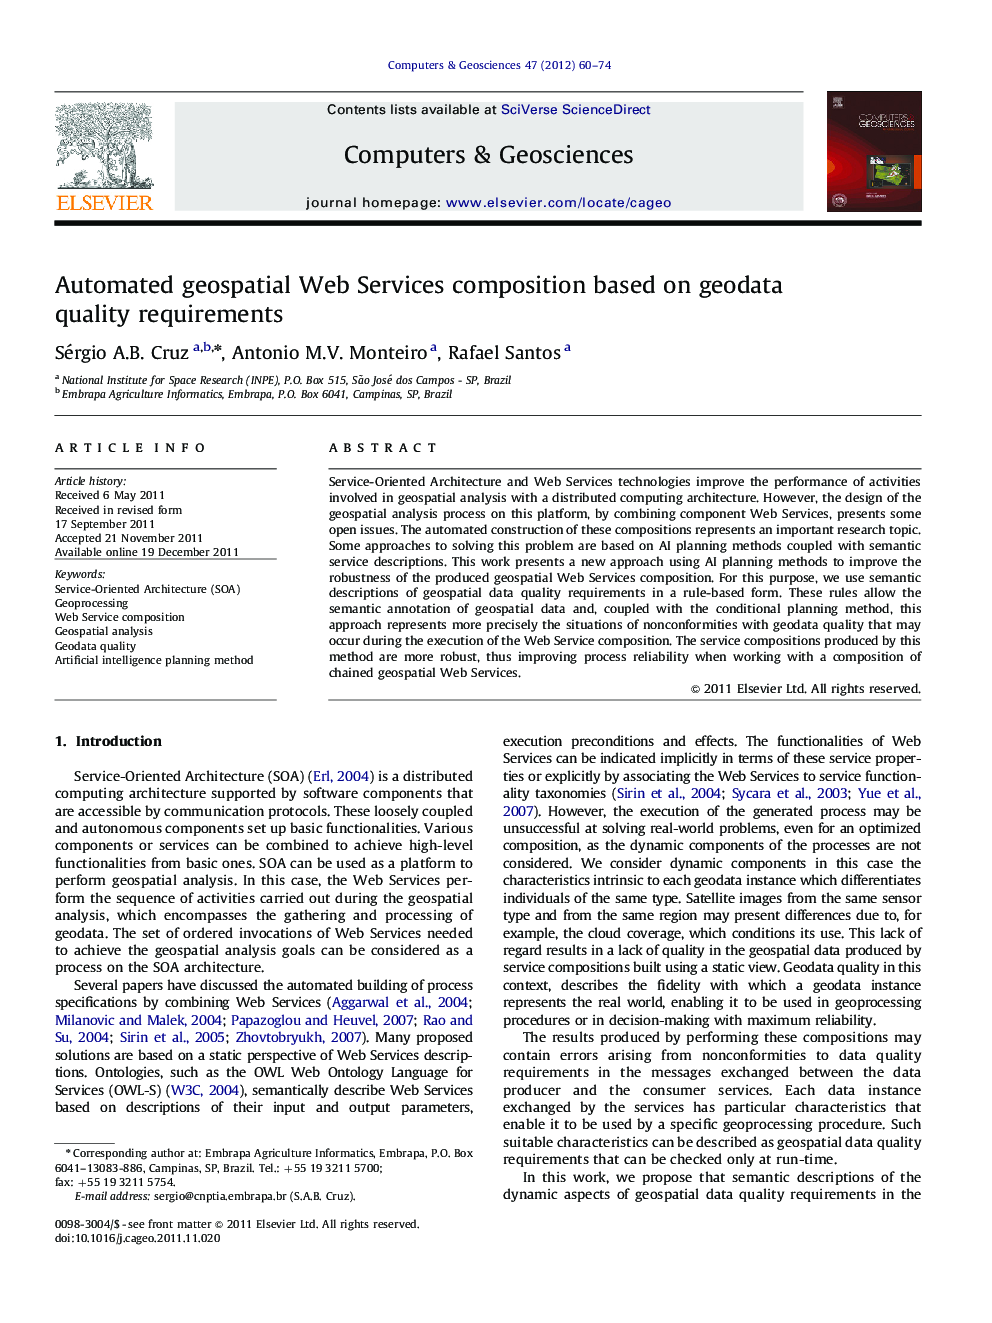 Automated geospatial Web Services composition based on geodata quality requirements